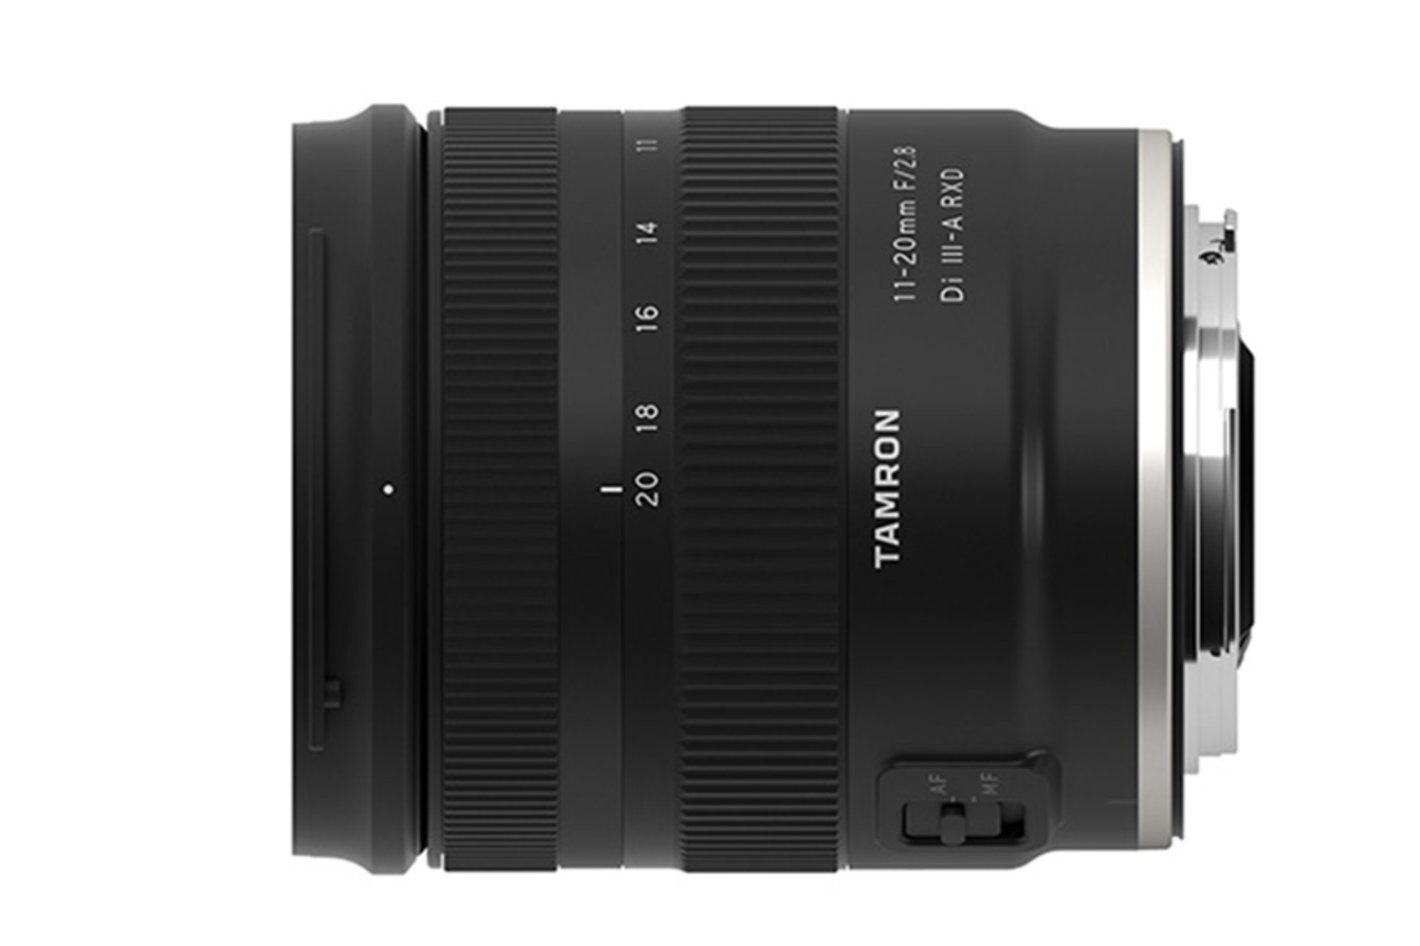 TAMRON’s first Canon RF mount lens: 11-20mm F/2.8 Di III-A RXD